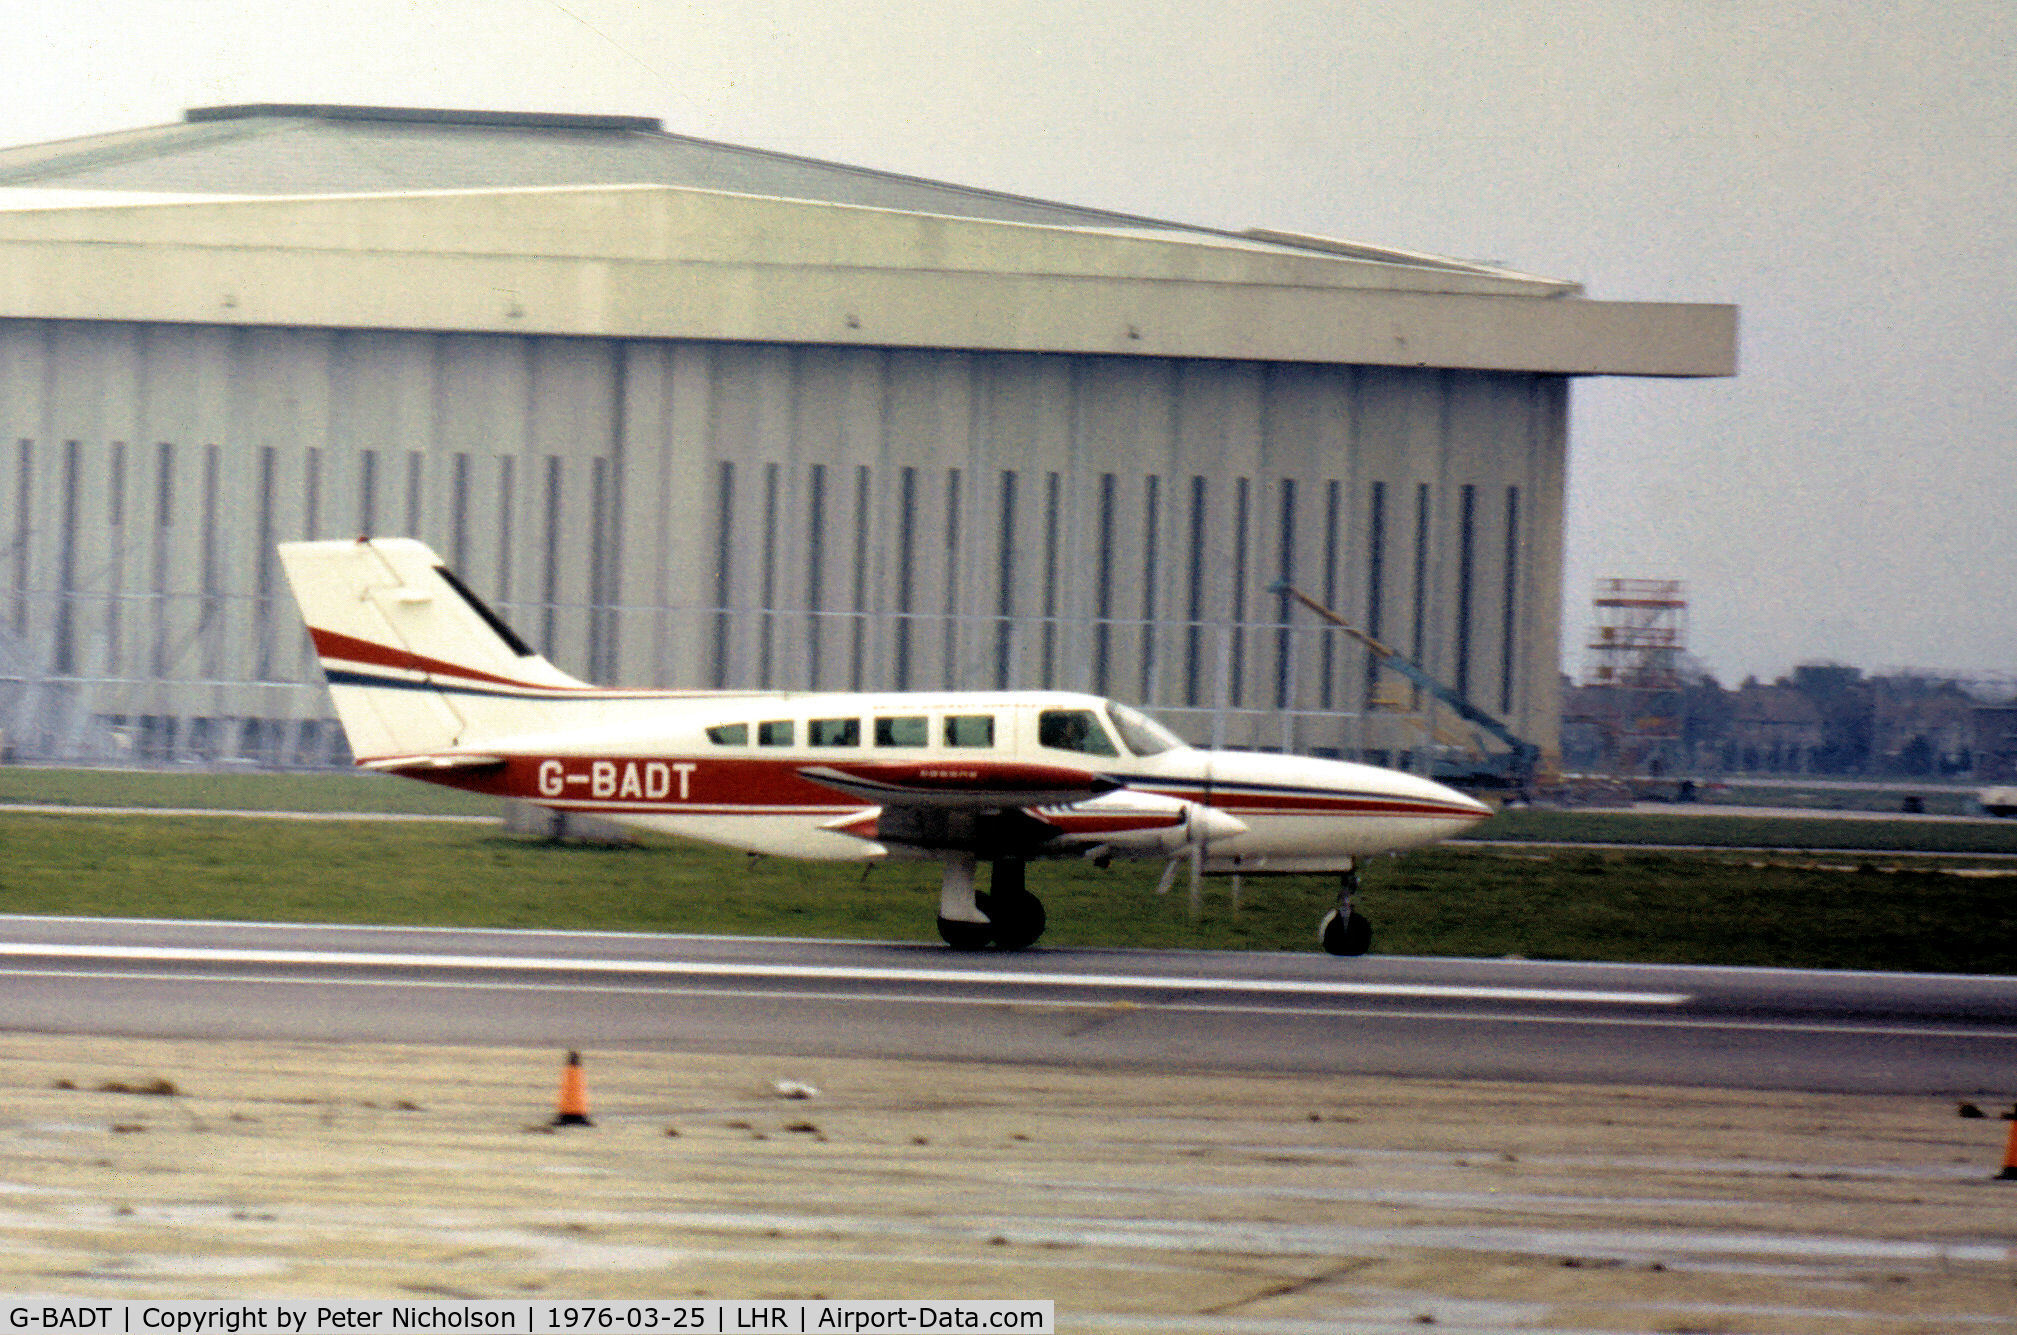 G-BADT, 1972 Cessna 402B C/N 402-0329, Cessna 402B as seen at Heathrow in the Spring of 1976.